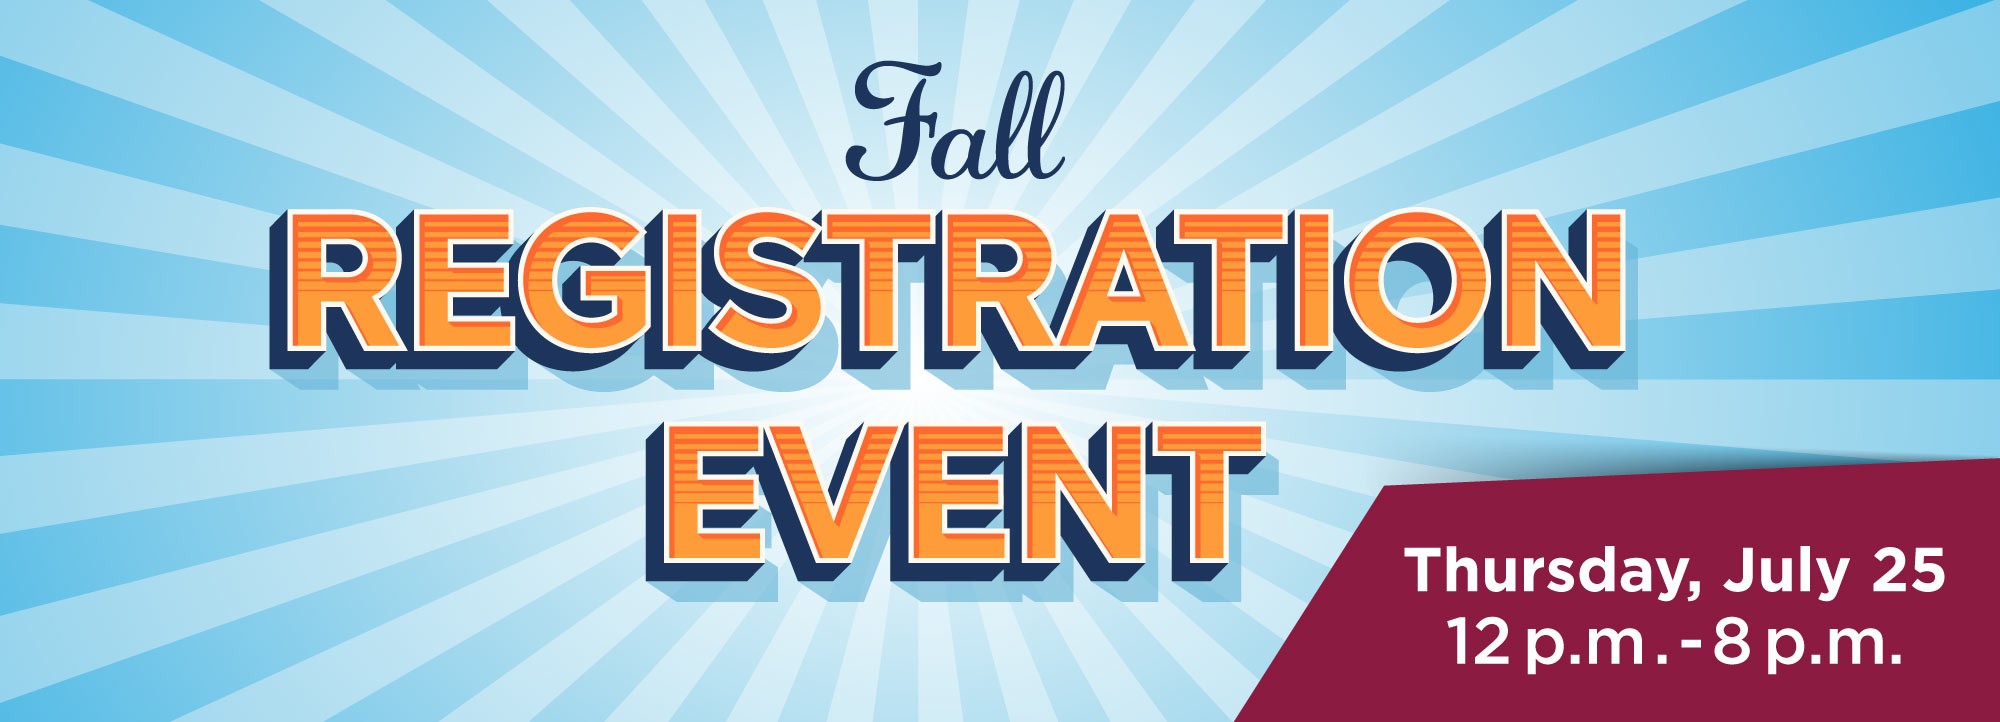 Fall Registration Event on Thursday, July 25